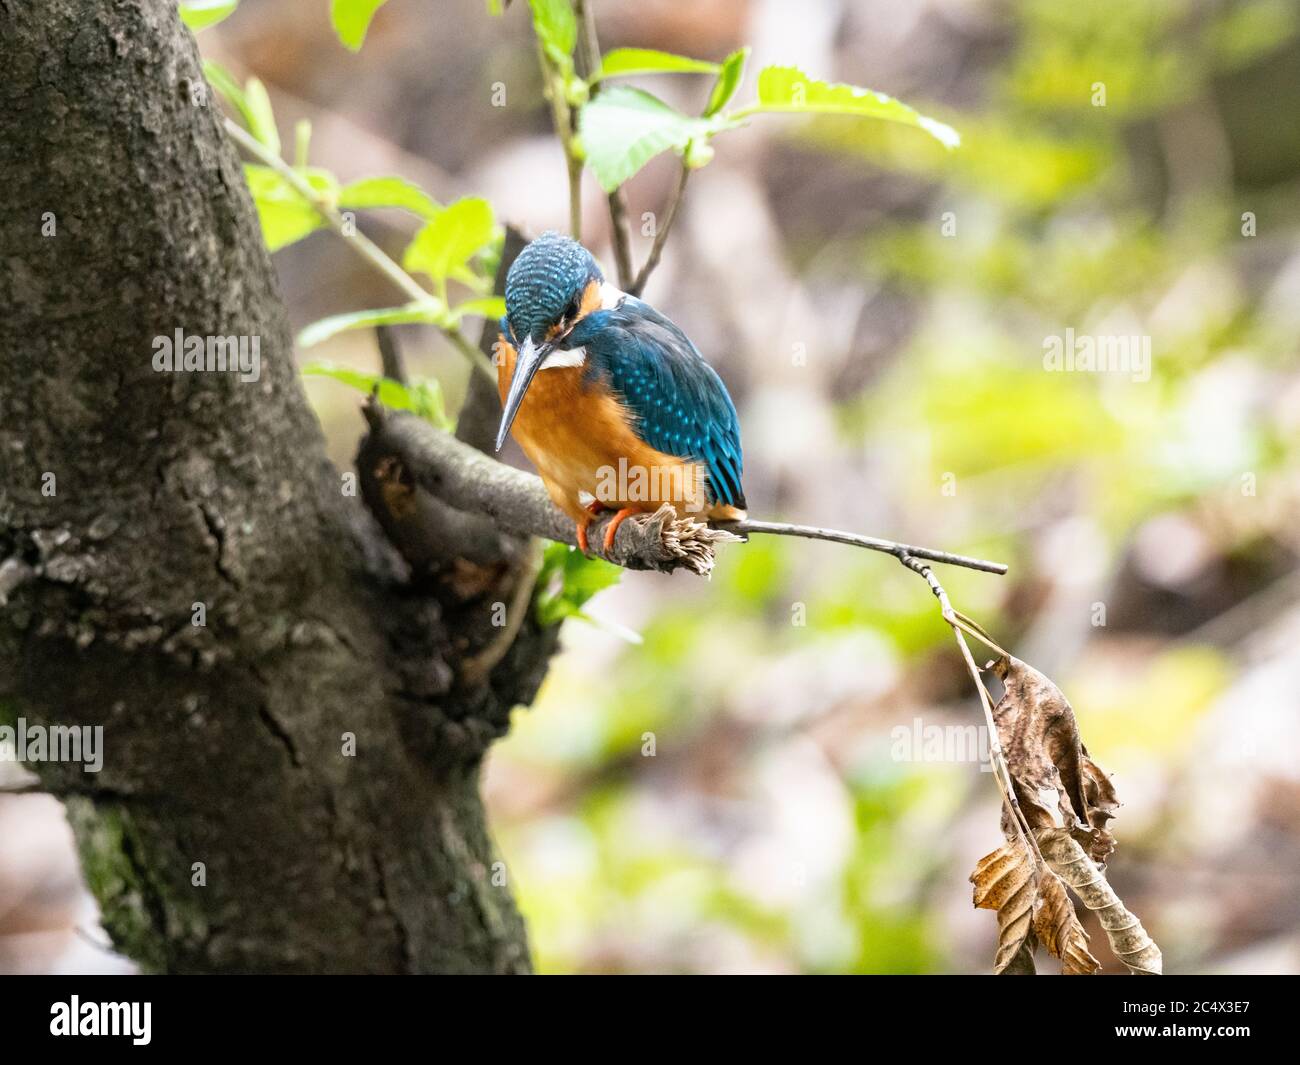 A colorful common kingfisher, Alcedo atthis bengalensis, perches in a tree branch while fishing in a small park pond near Yokohama, Japan. Stock Photo